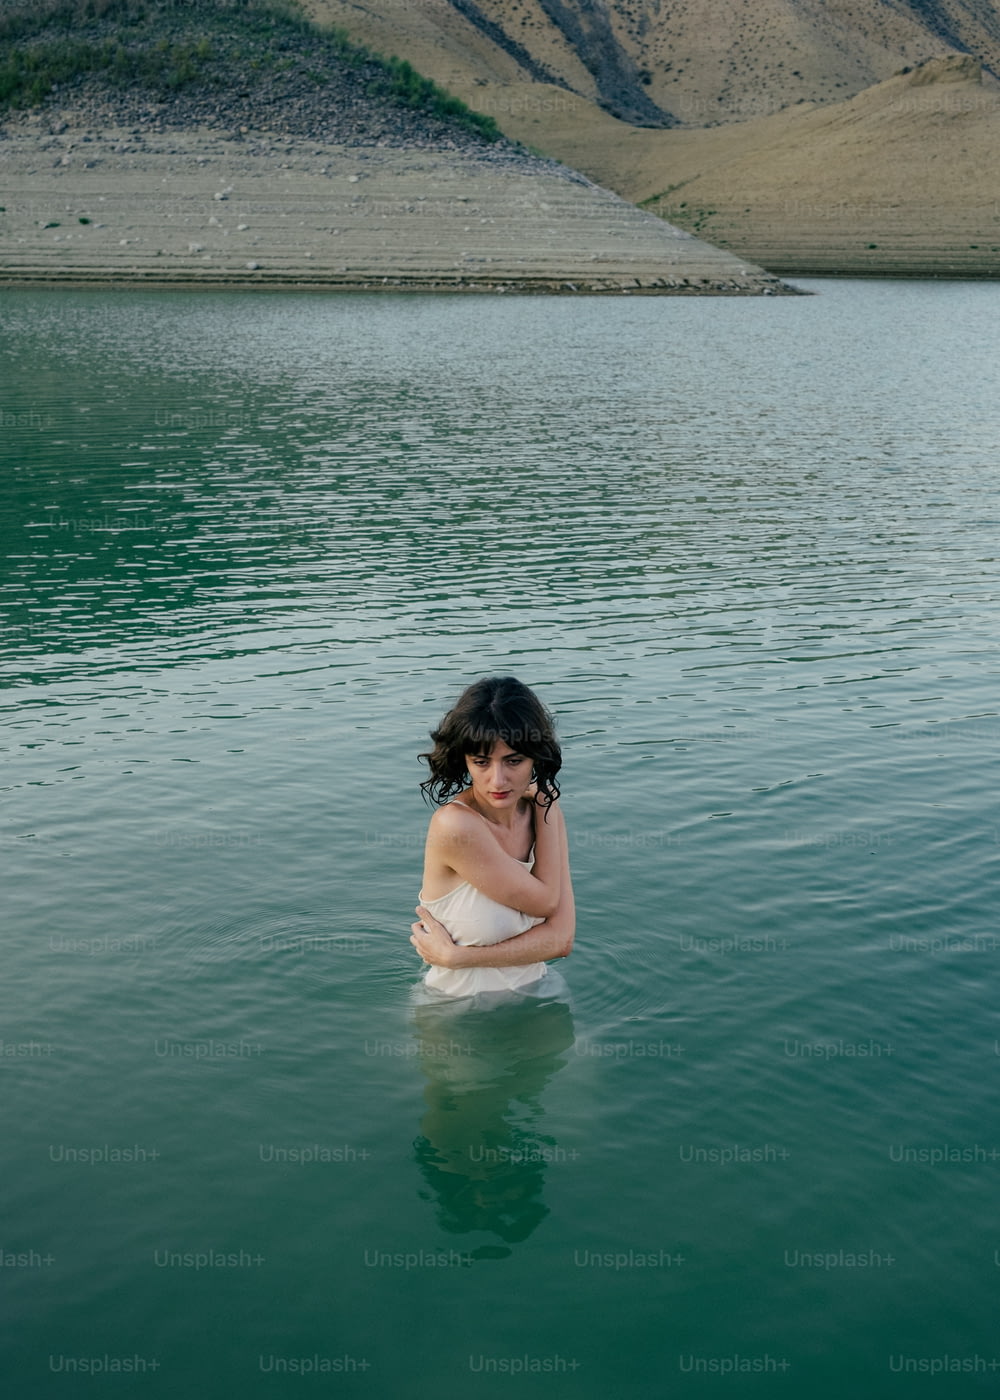 a woman in a white dress sitting in a body of water